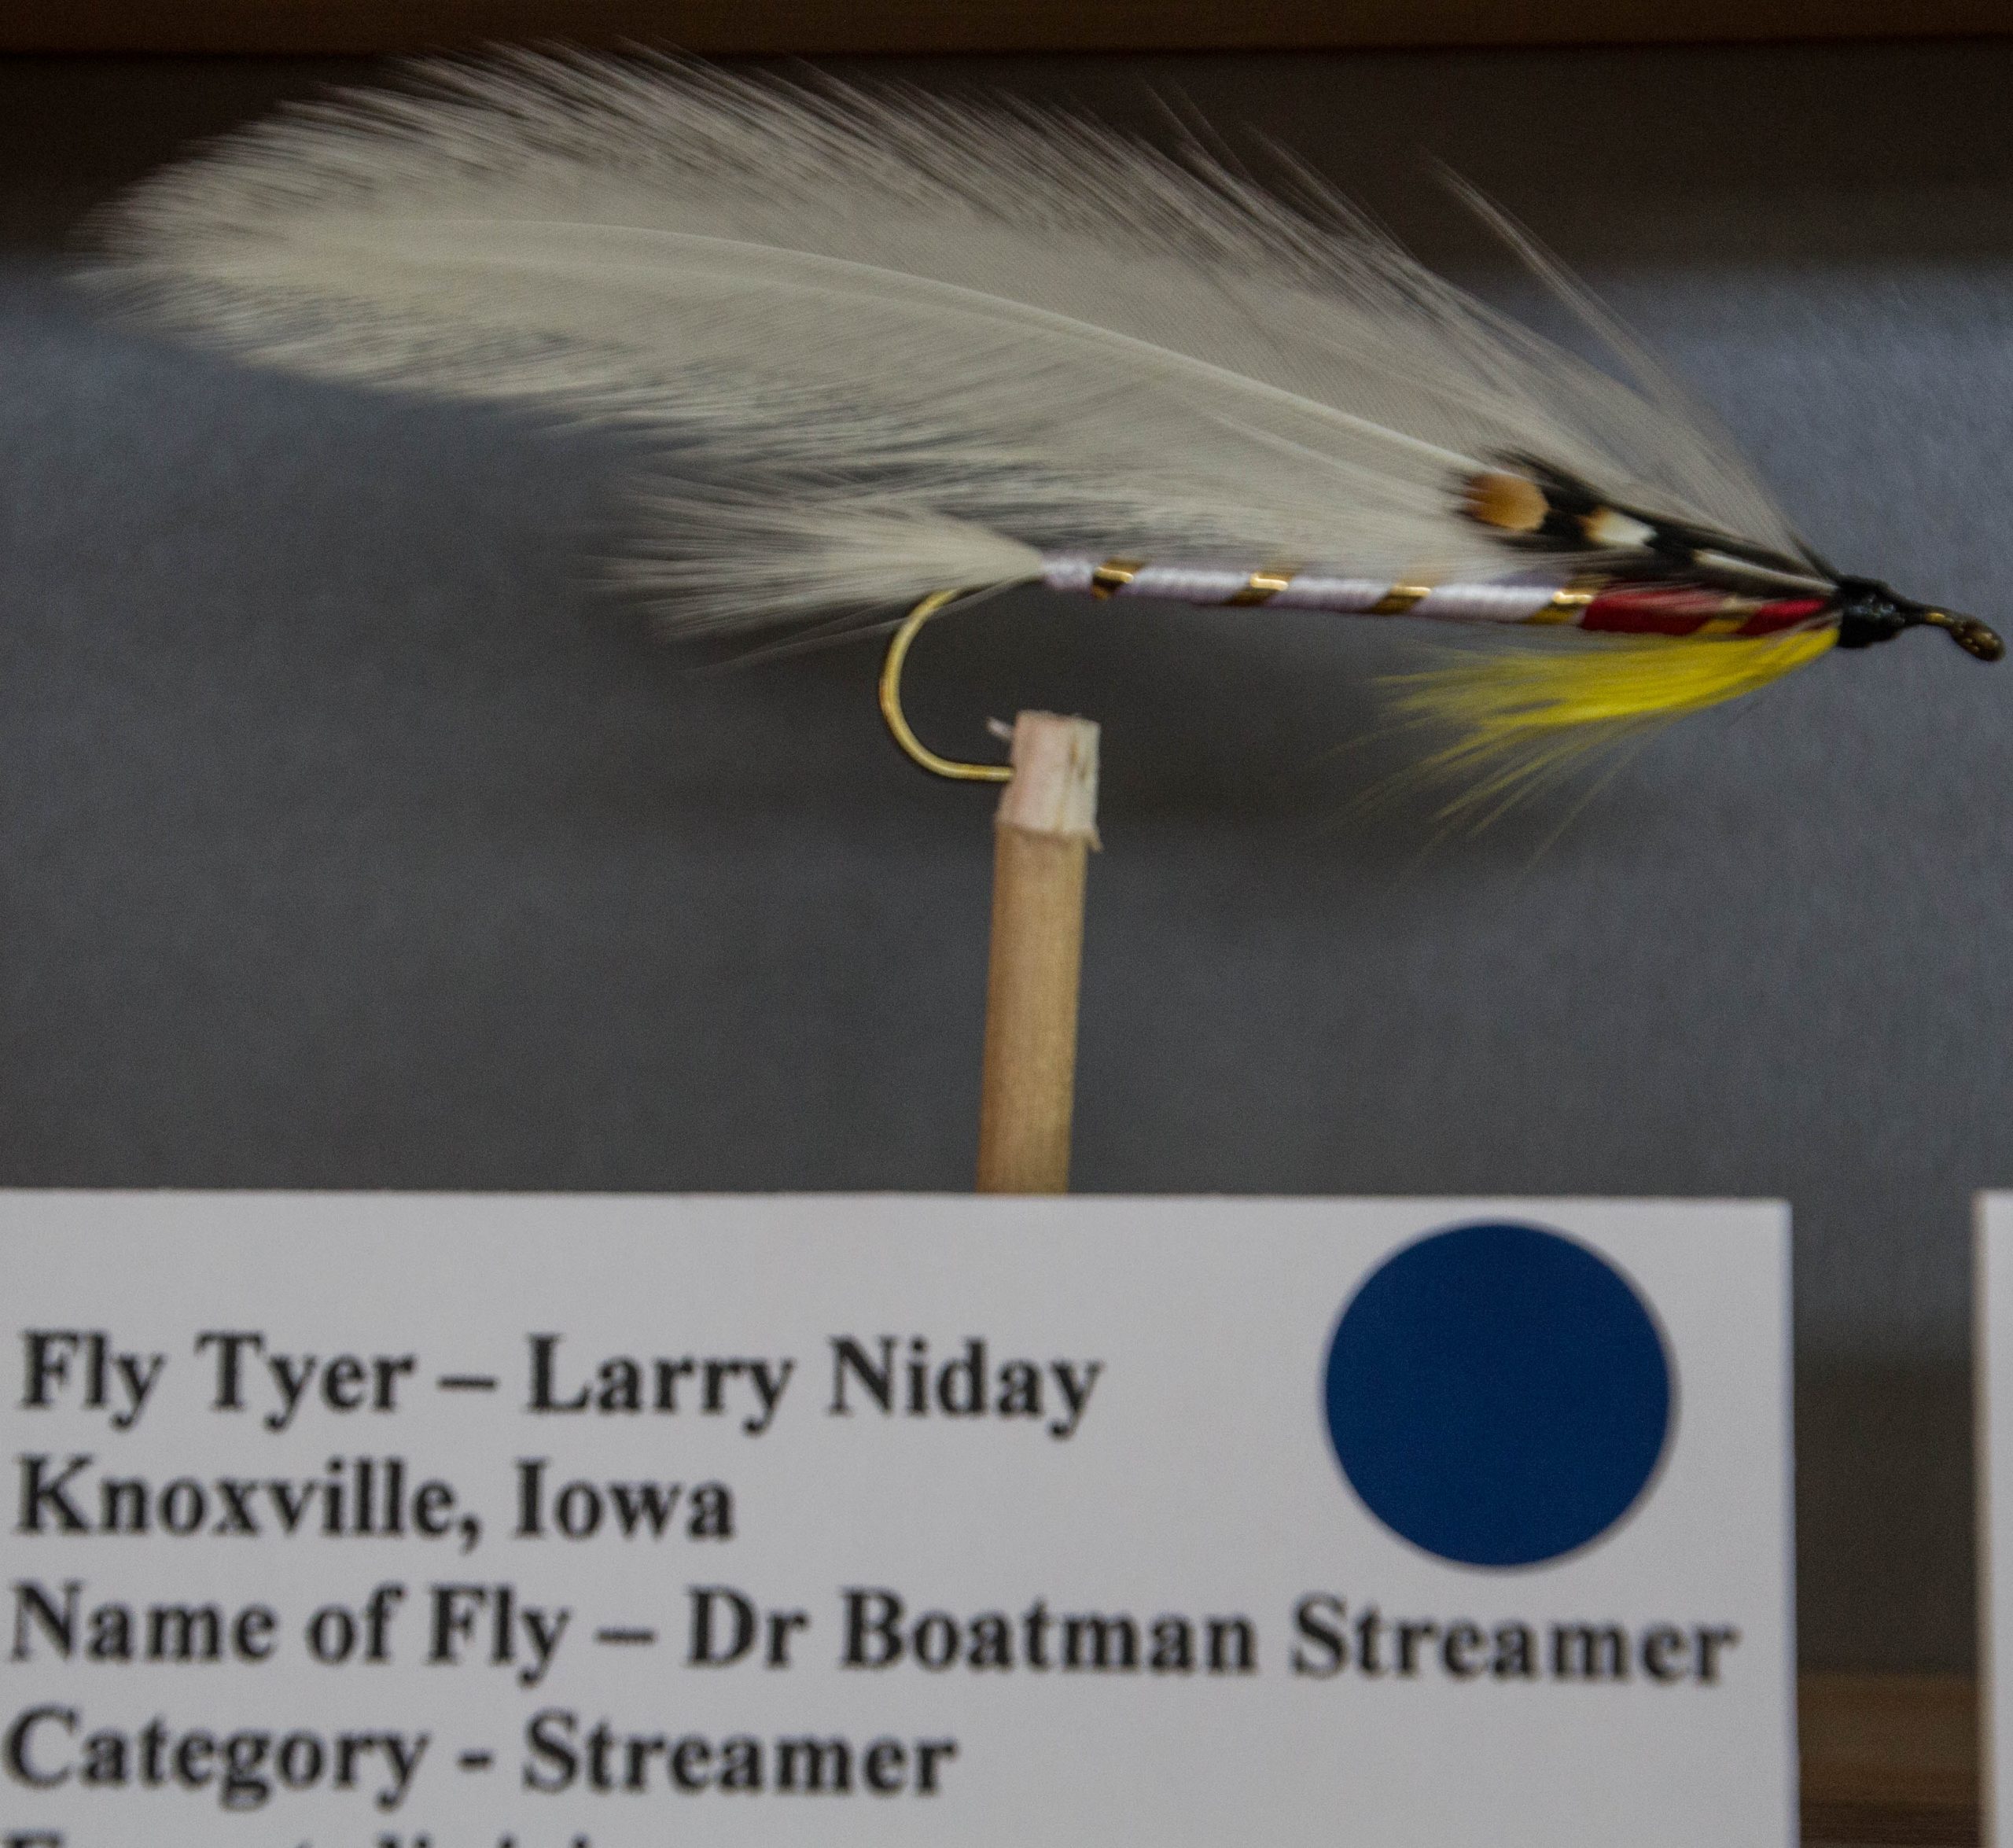 Closeup of a fly on display at the fly fishing competition.